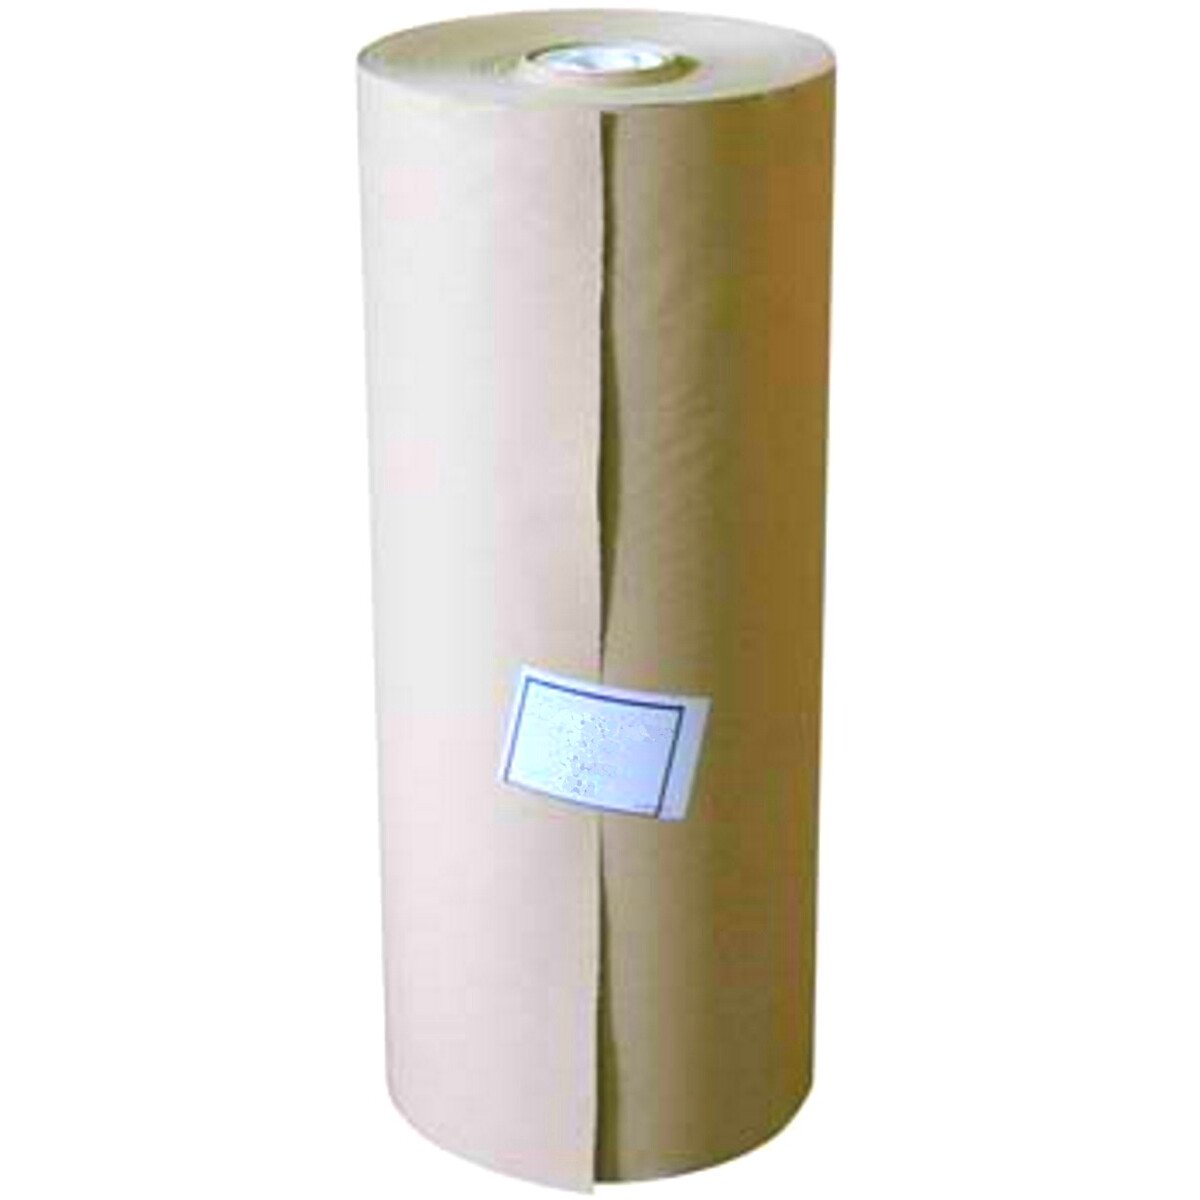 Lawson-HIS 0969 Brown Paper Roll 1150mm x 200m